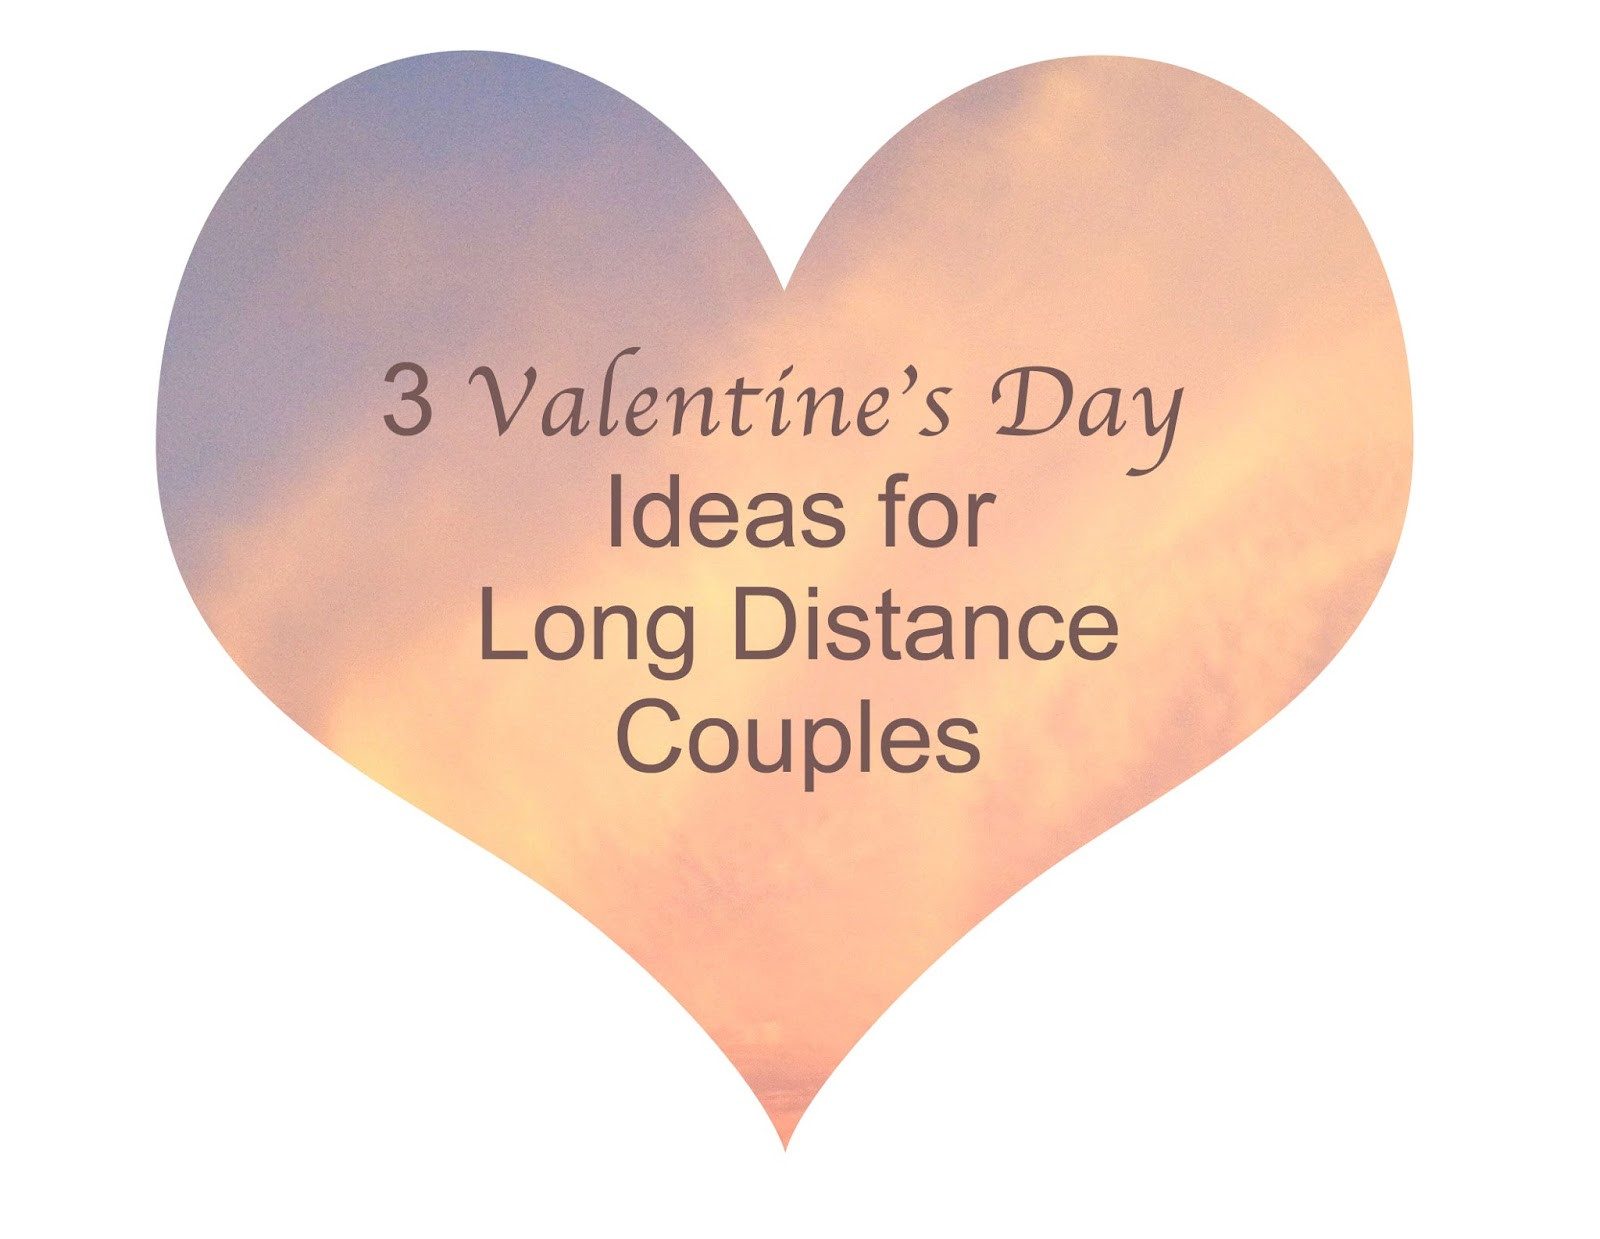 Valentines Day Long Distance Ideas
 Meet Me In Midtown 3 Valentine s Day Ideas for Long